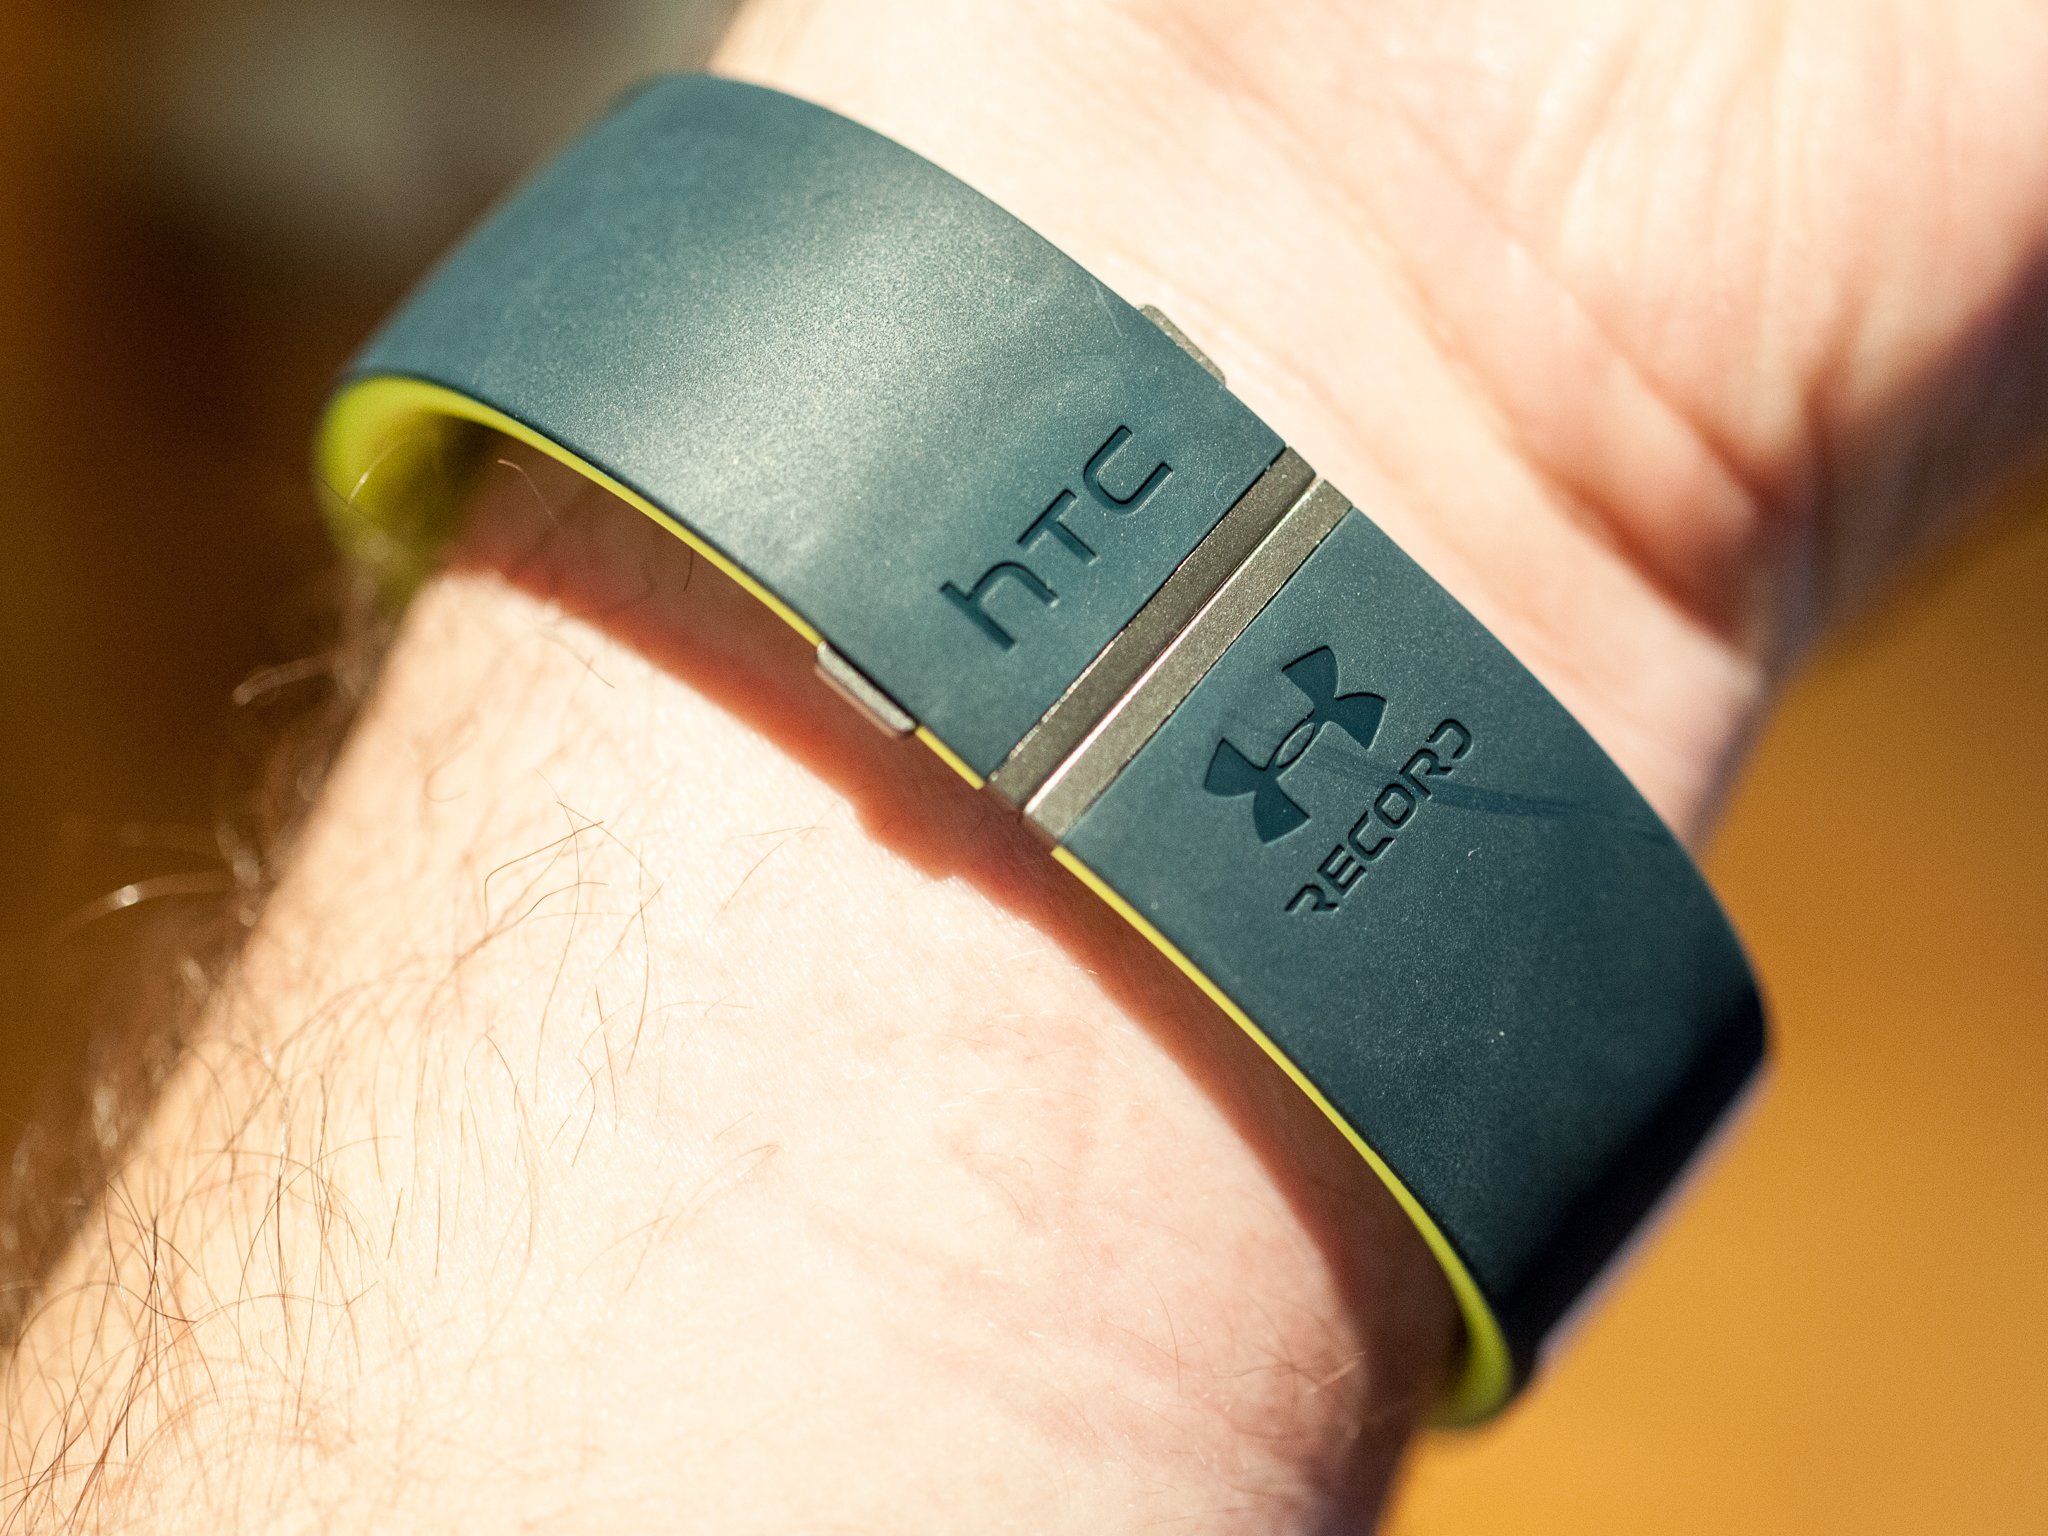 under armour band fitness tracker